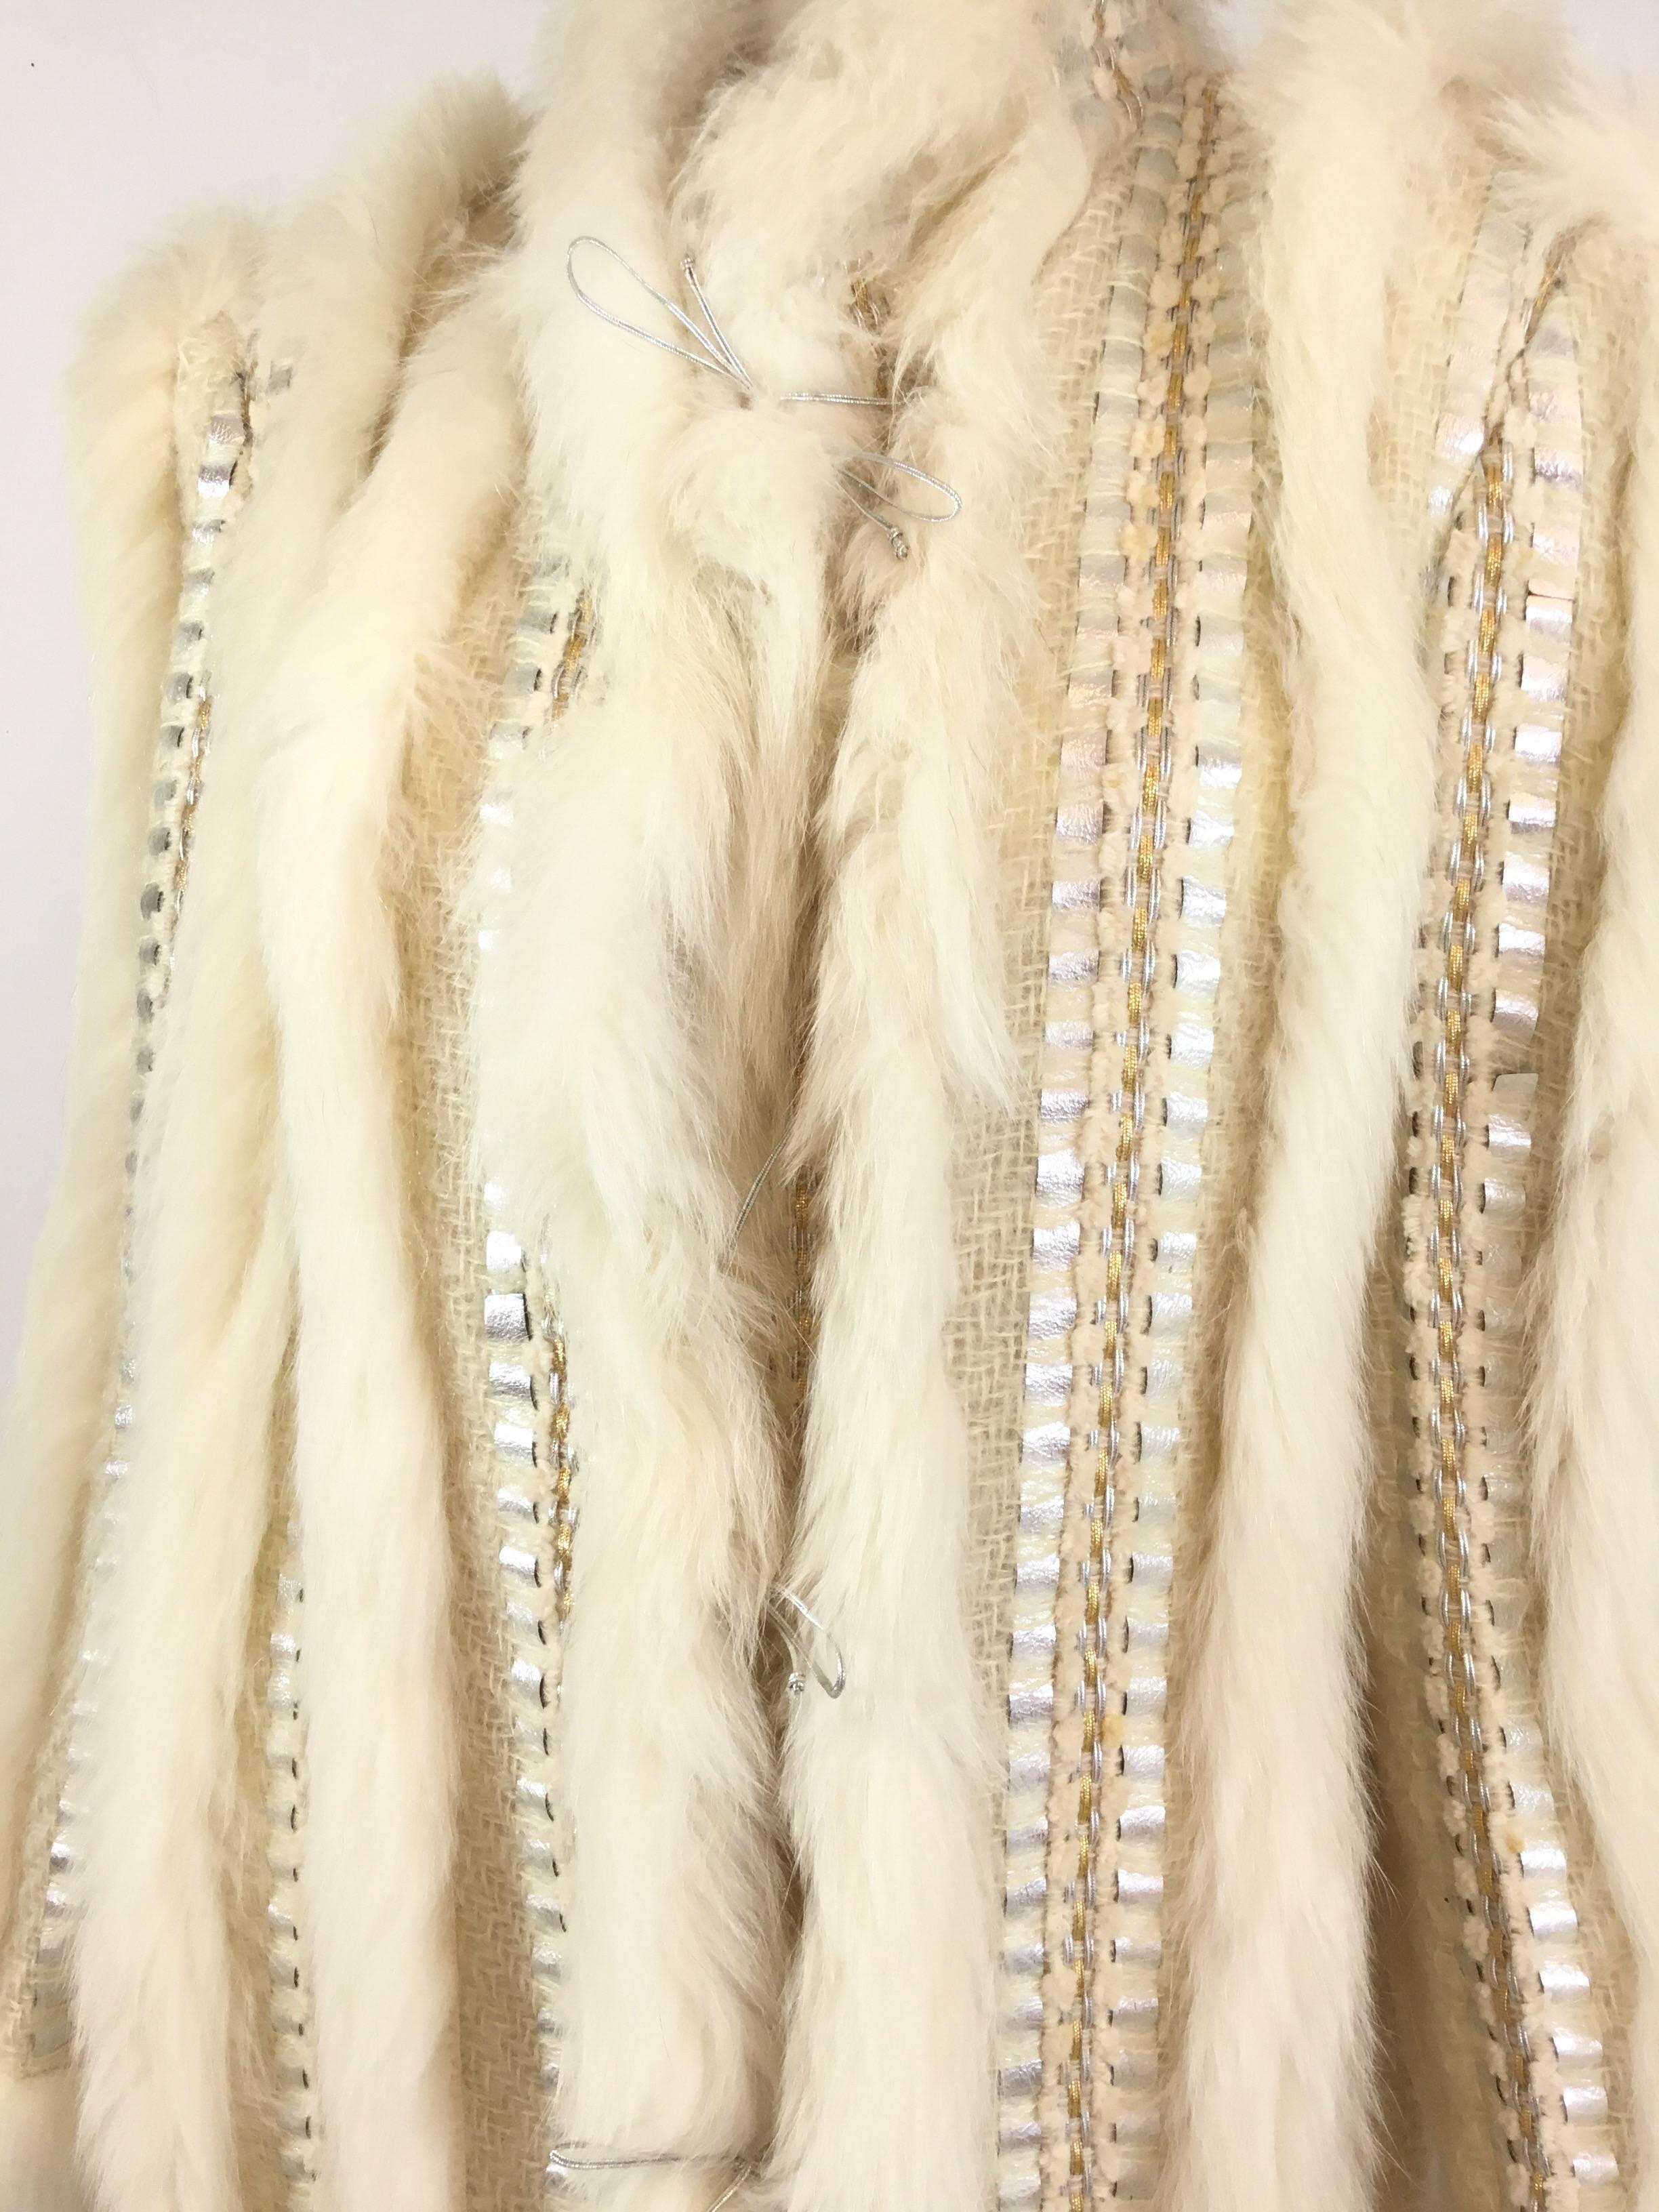 Long fox fur and Loose weave mohair coat features silver string tie closures along the front, Gold and silver braid embellishments, silver metallic leather embellishments and a full lining. Artist hand made, art to wear. Vintage 1980's. Labeled size